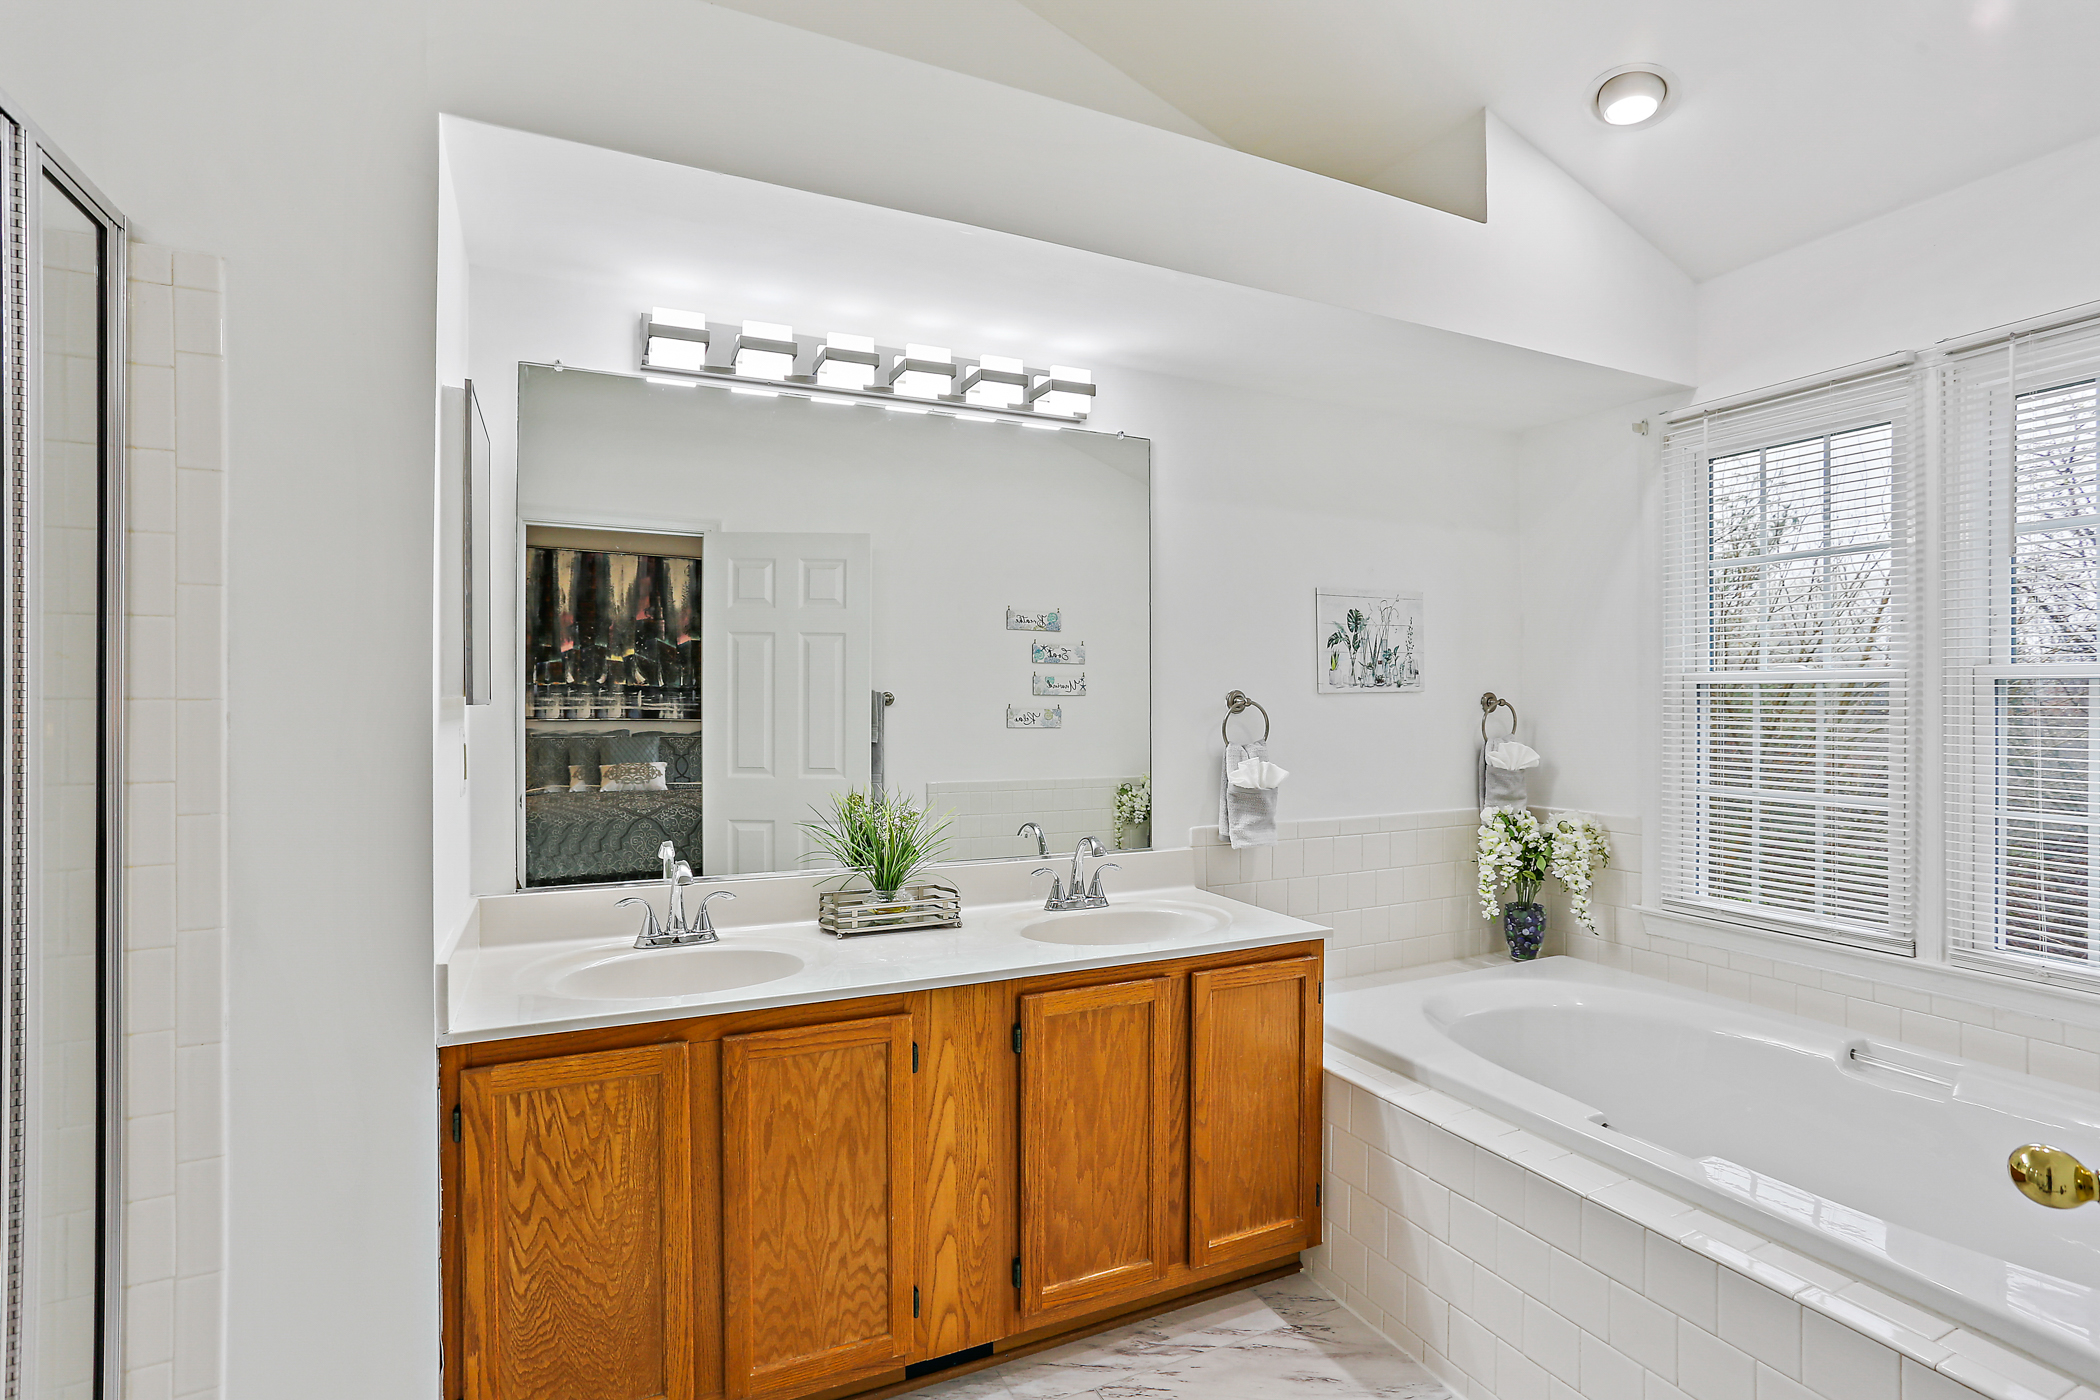 6203 Knolls Ct, double vanity in bathroom with sunken tub and glass shower.